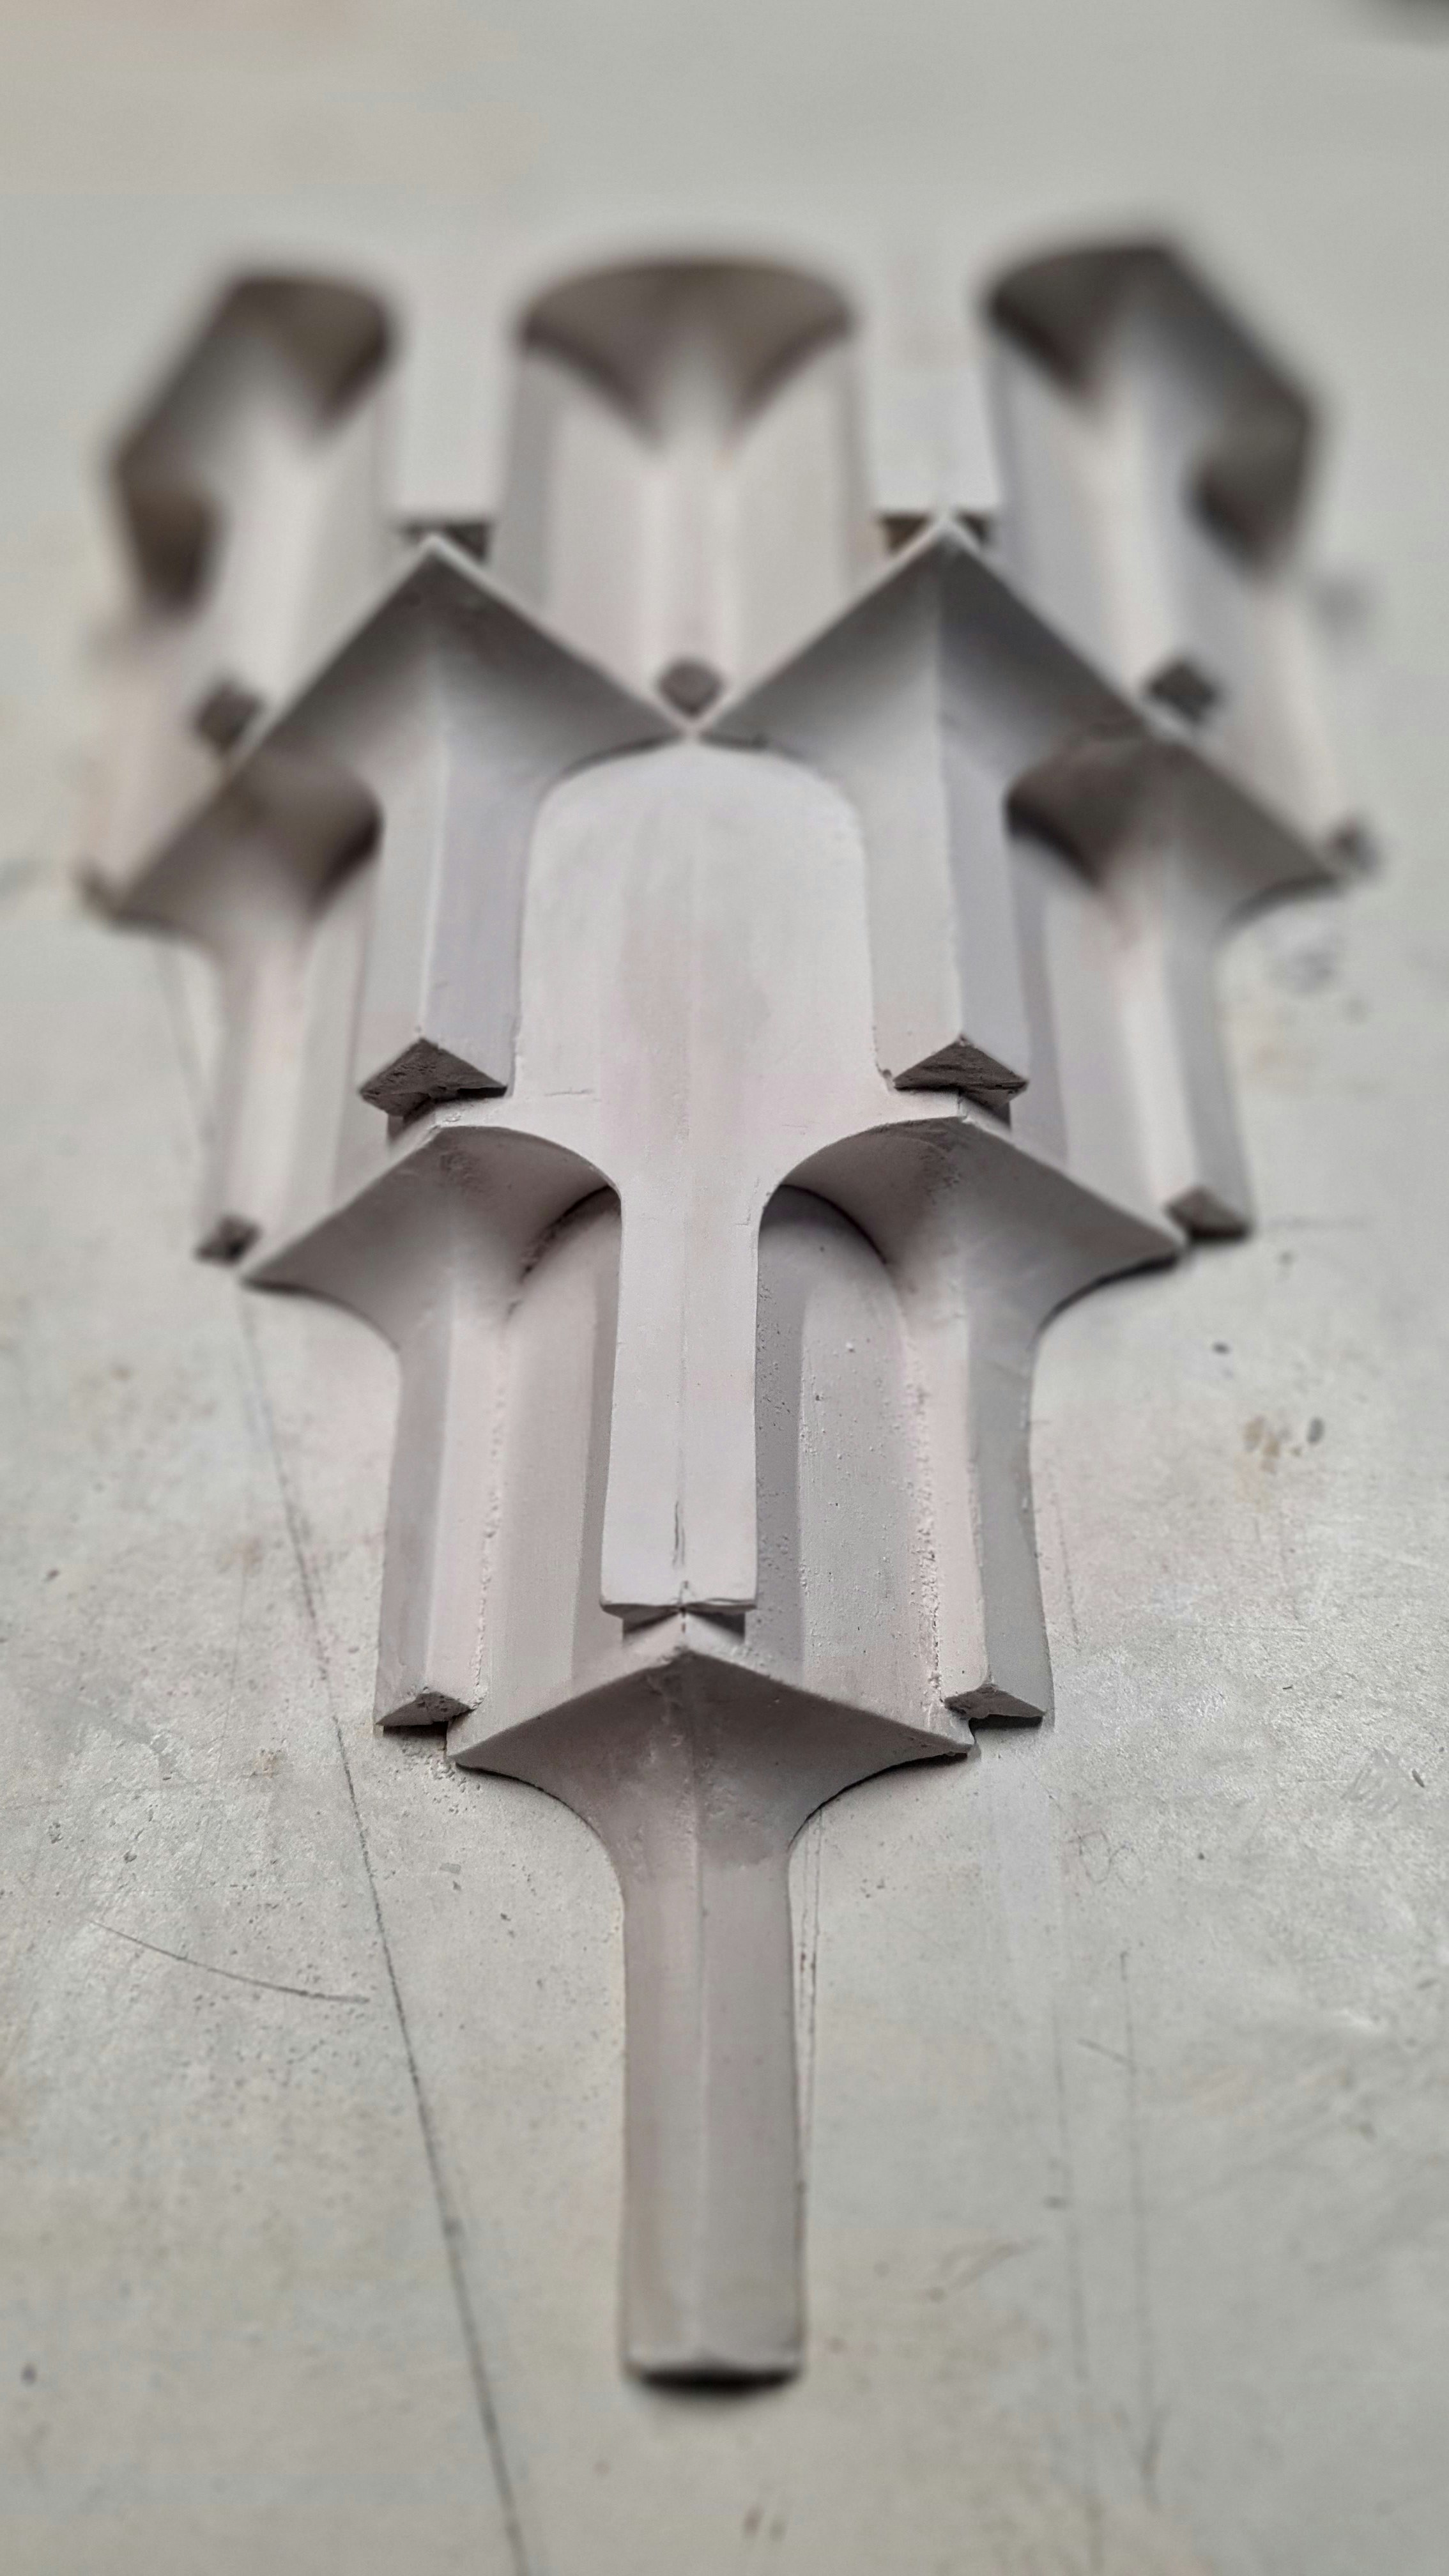 A photograph of a plaster wall moulding made up of geometric shapes.